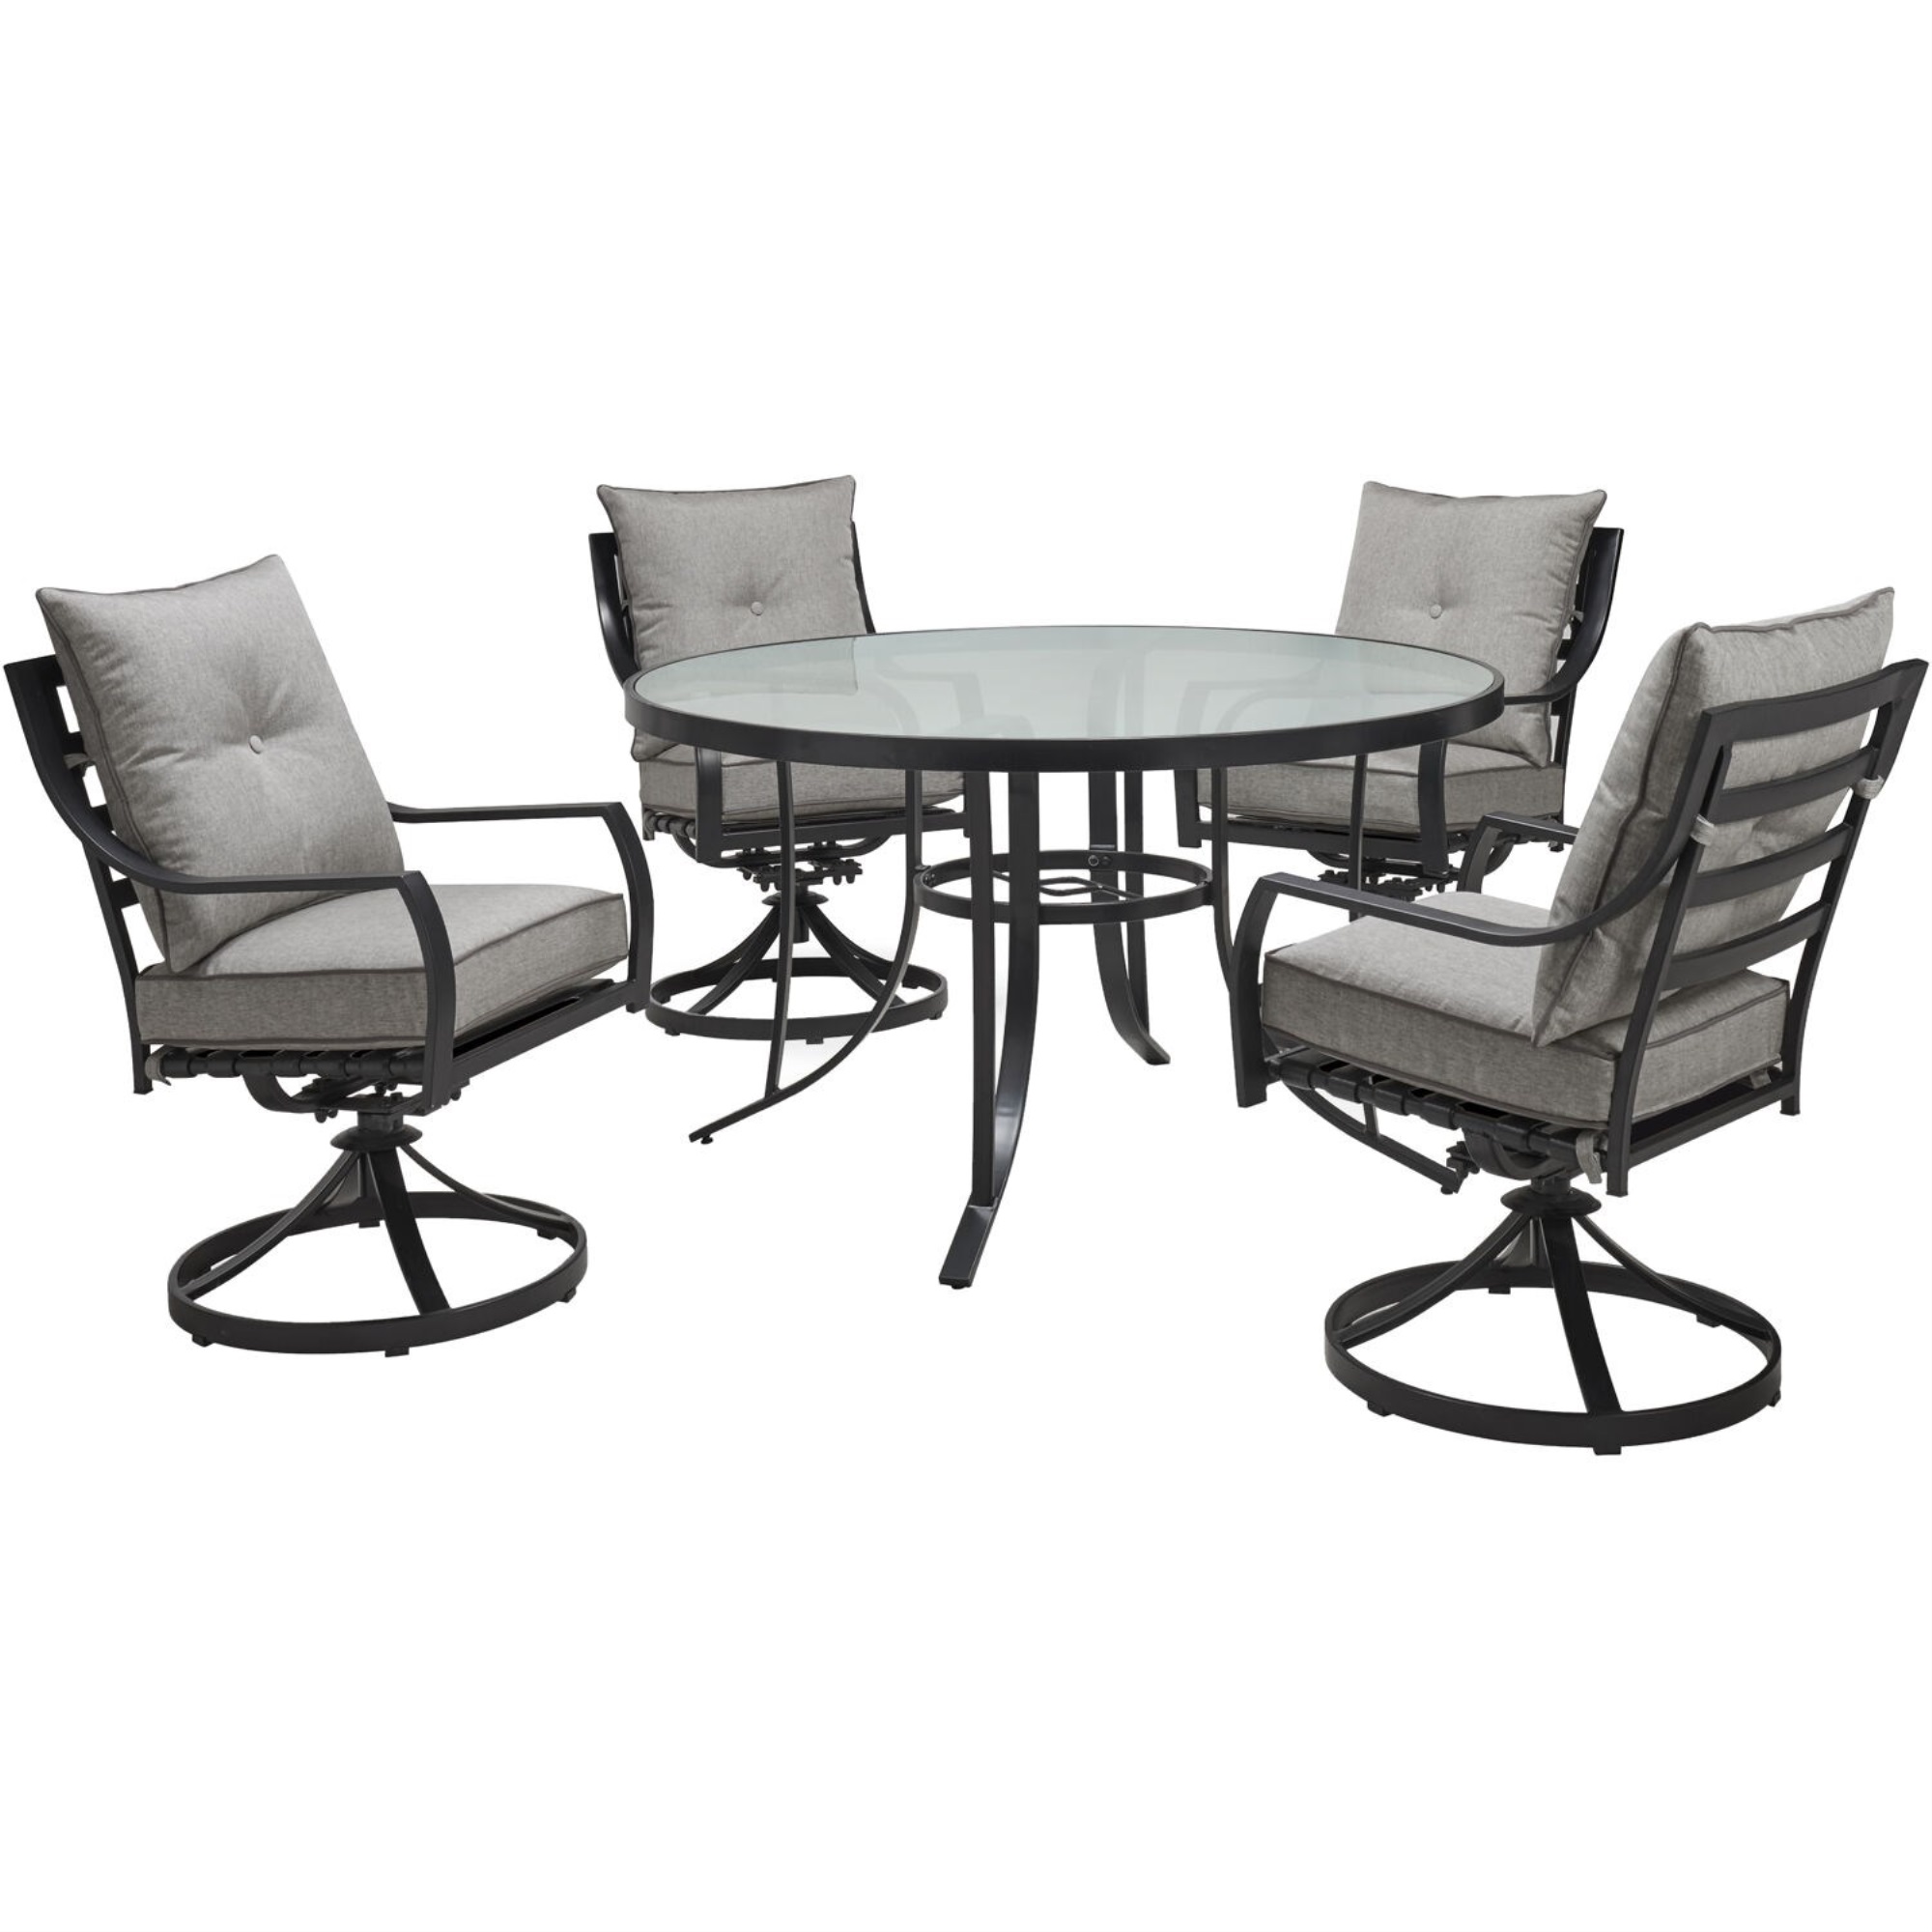 Hanover Lavallette5pc: 4 Swivel Dining Chairs and Round Glass Table - Silver